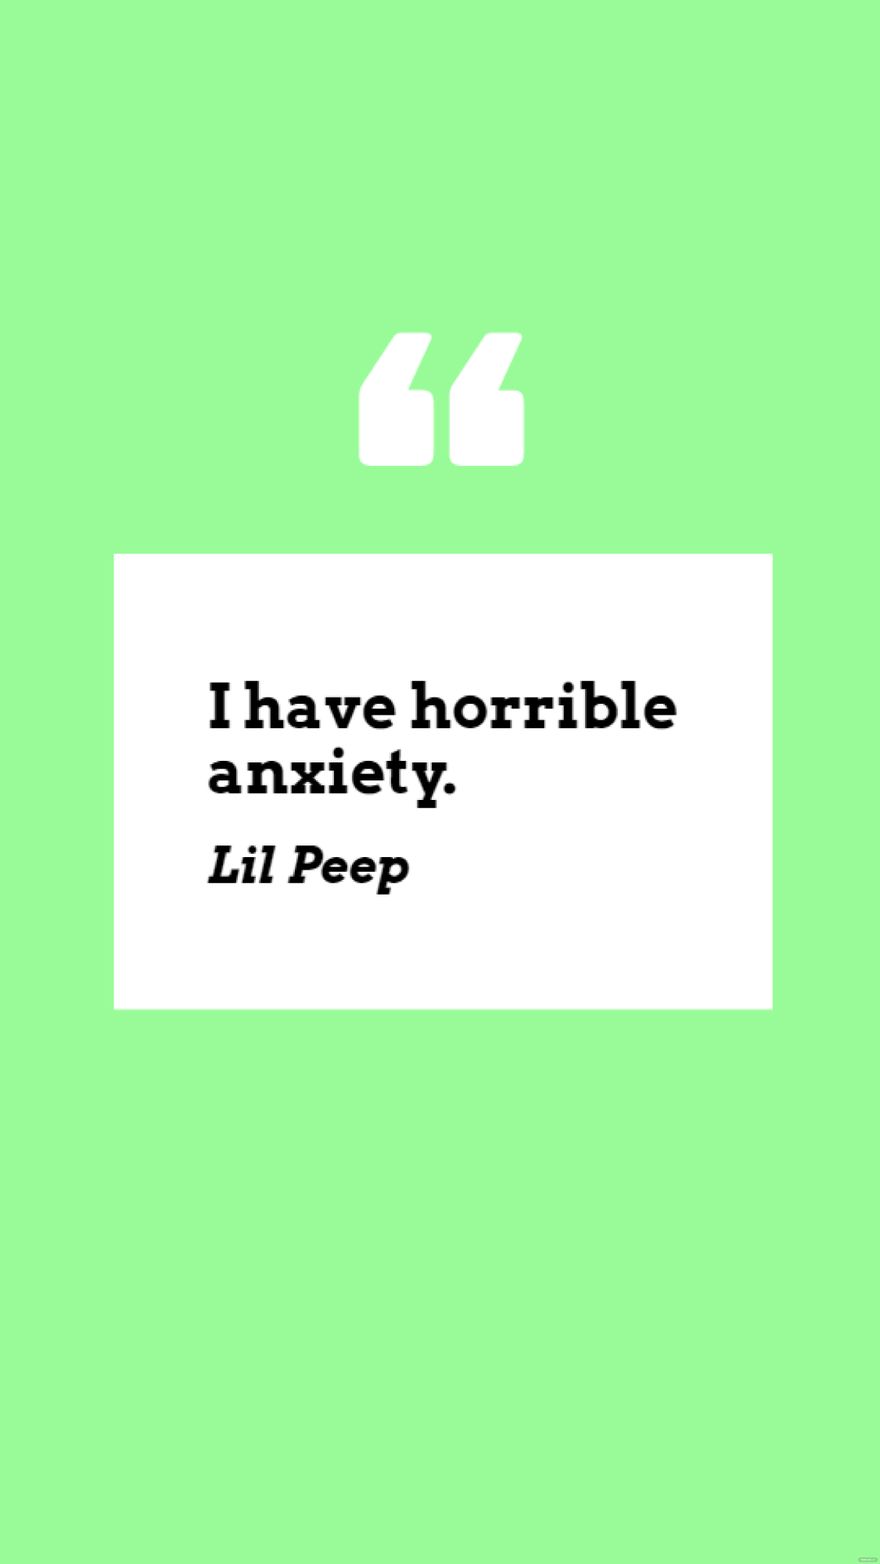 Free Lil Peep - I have horrible anxiety.